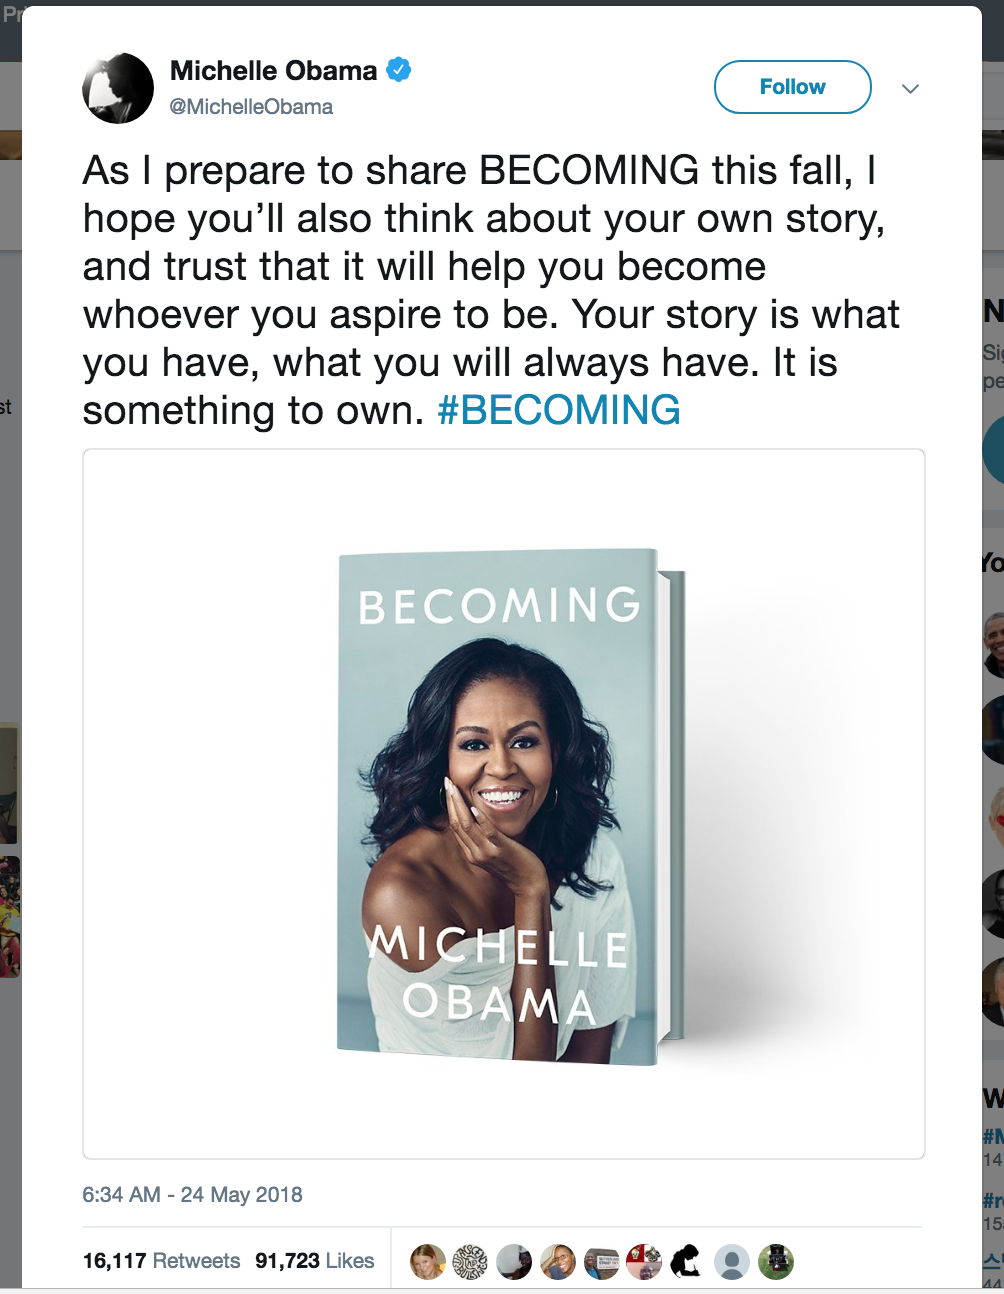 Michelle Obama's Tweet of Book Cover Becoming